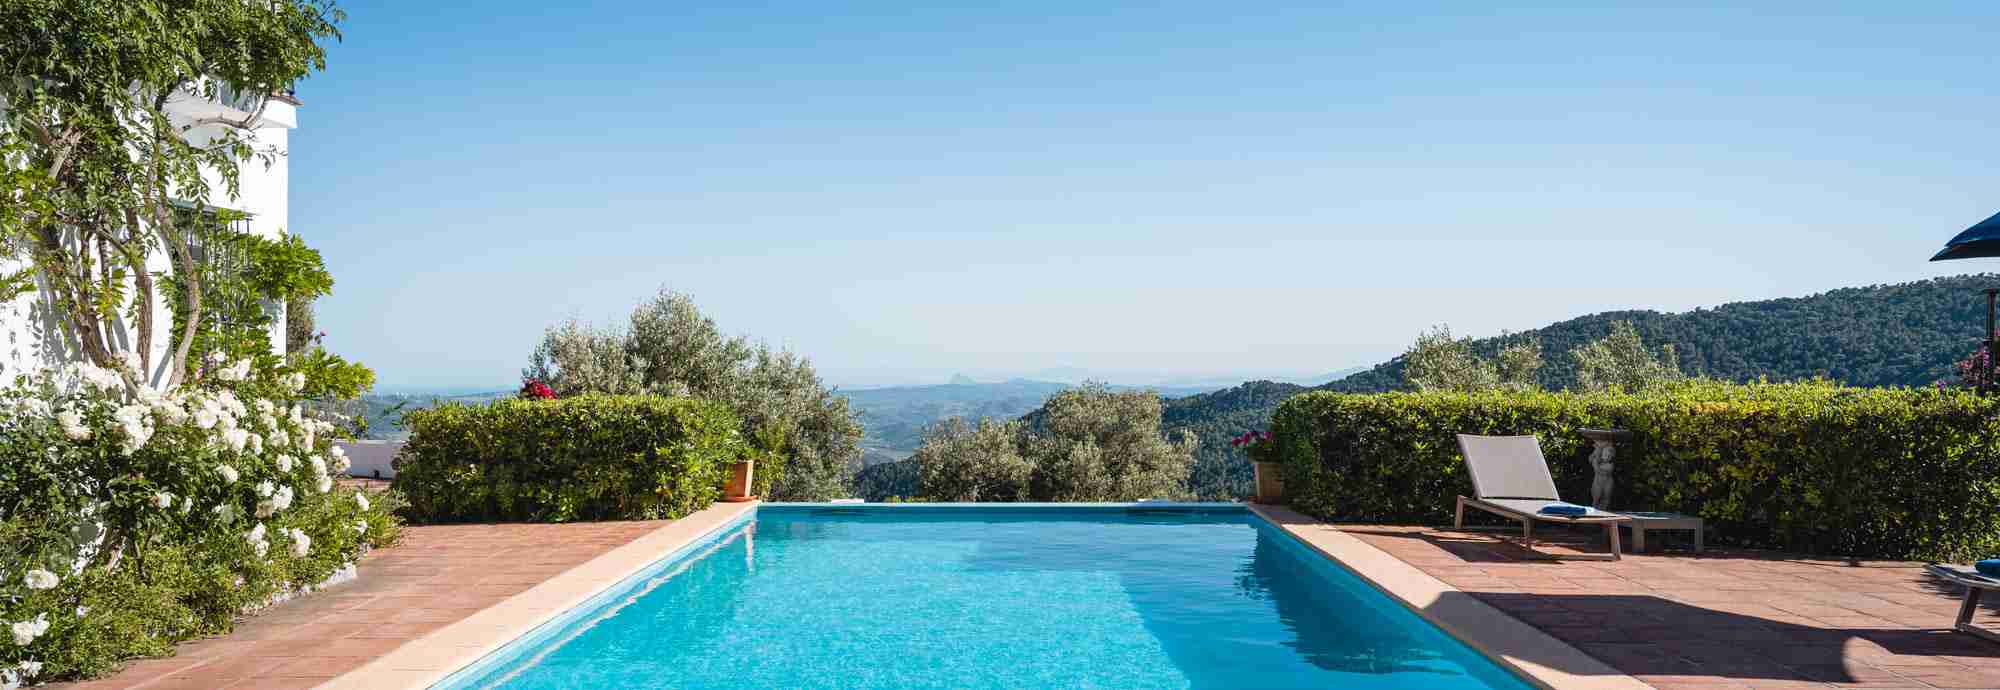 Family home with 10 metre pool and stunning views just outside Gaucin